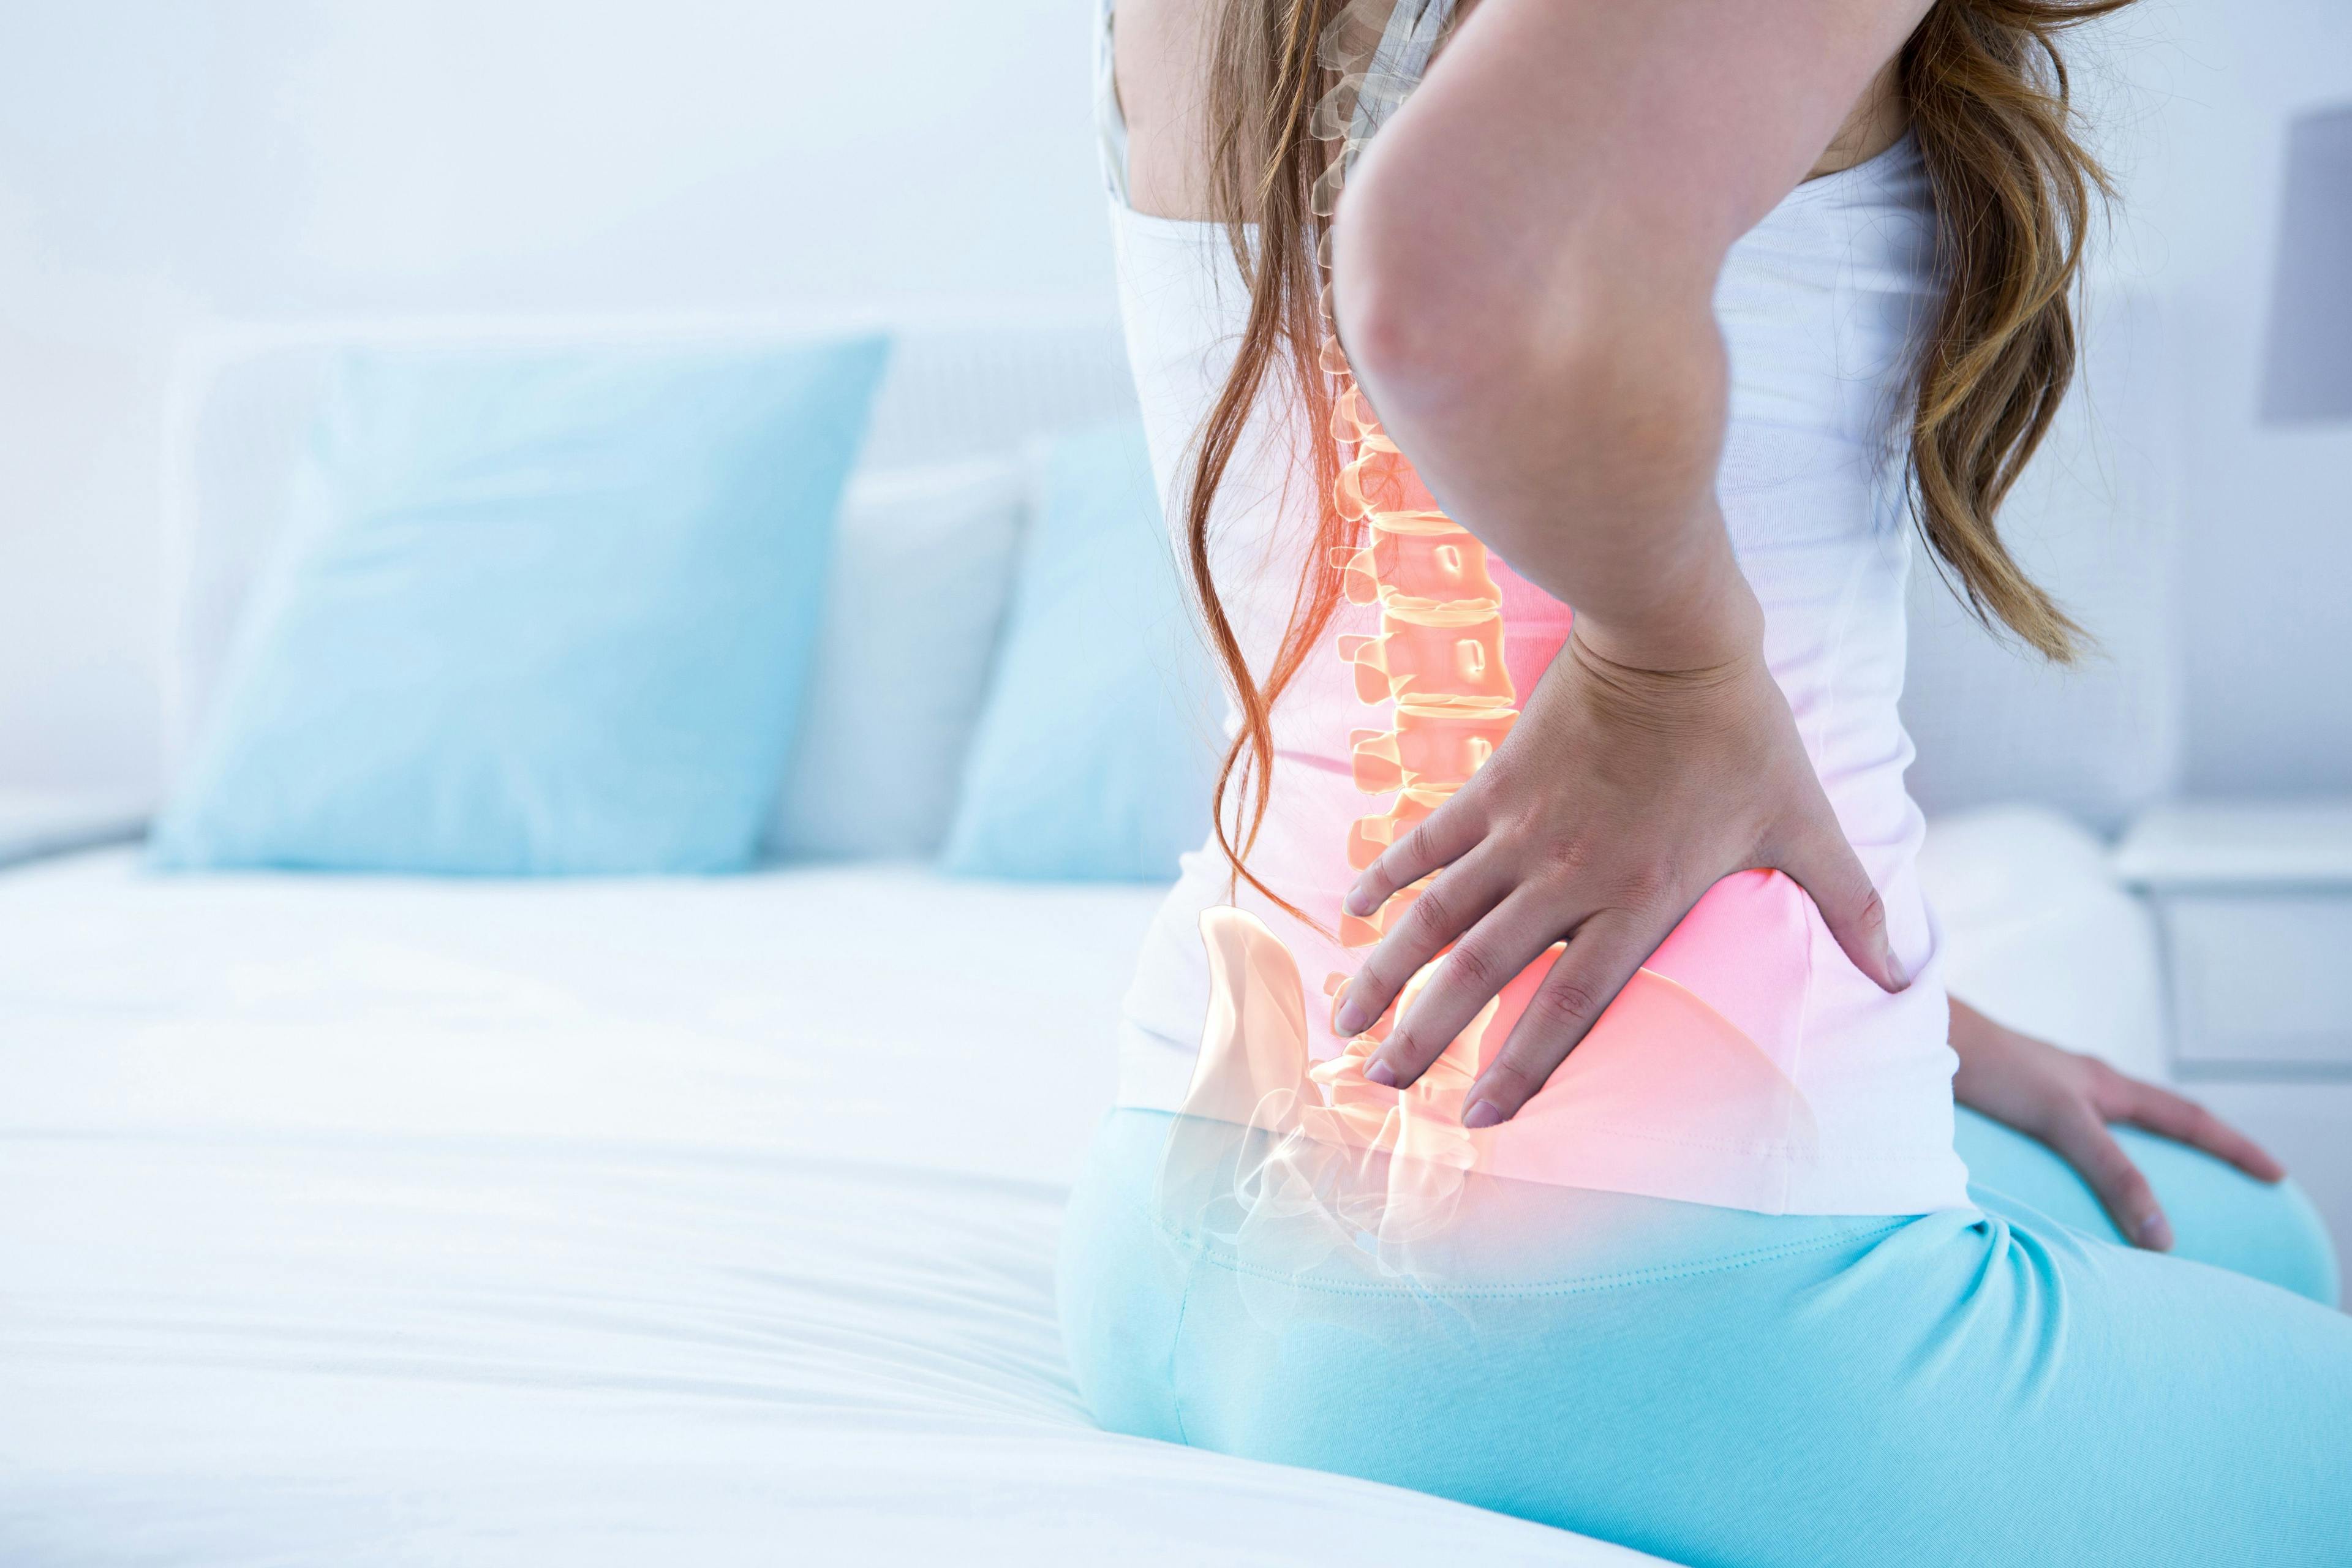 Woman sitting on bed with back pain illustrated by a highlighted spine | Image credit: WavebreakMediaMicro - stock.adobe.com